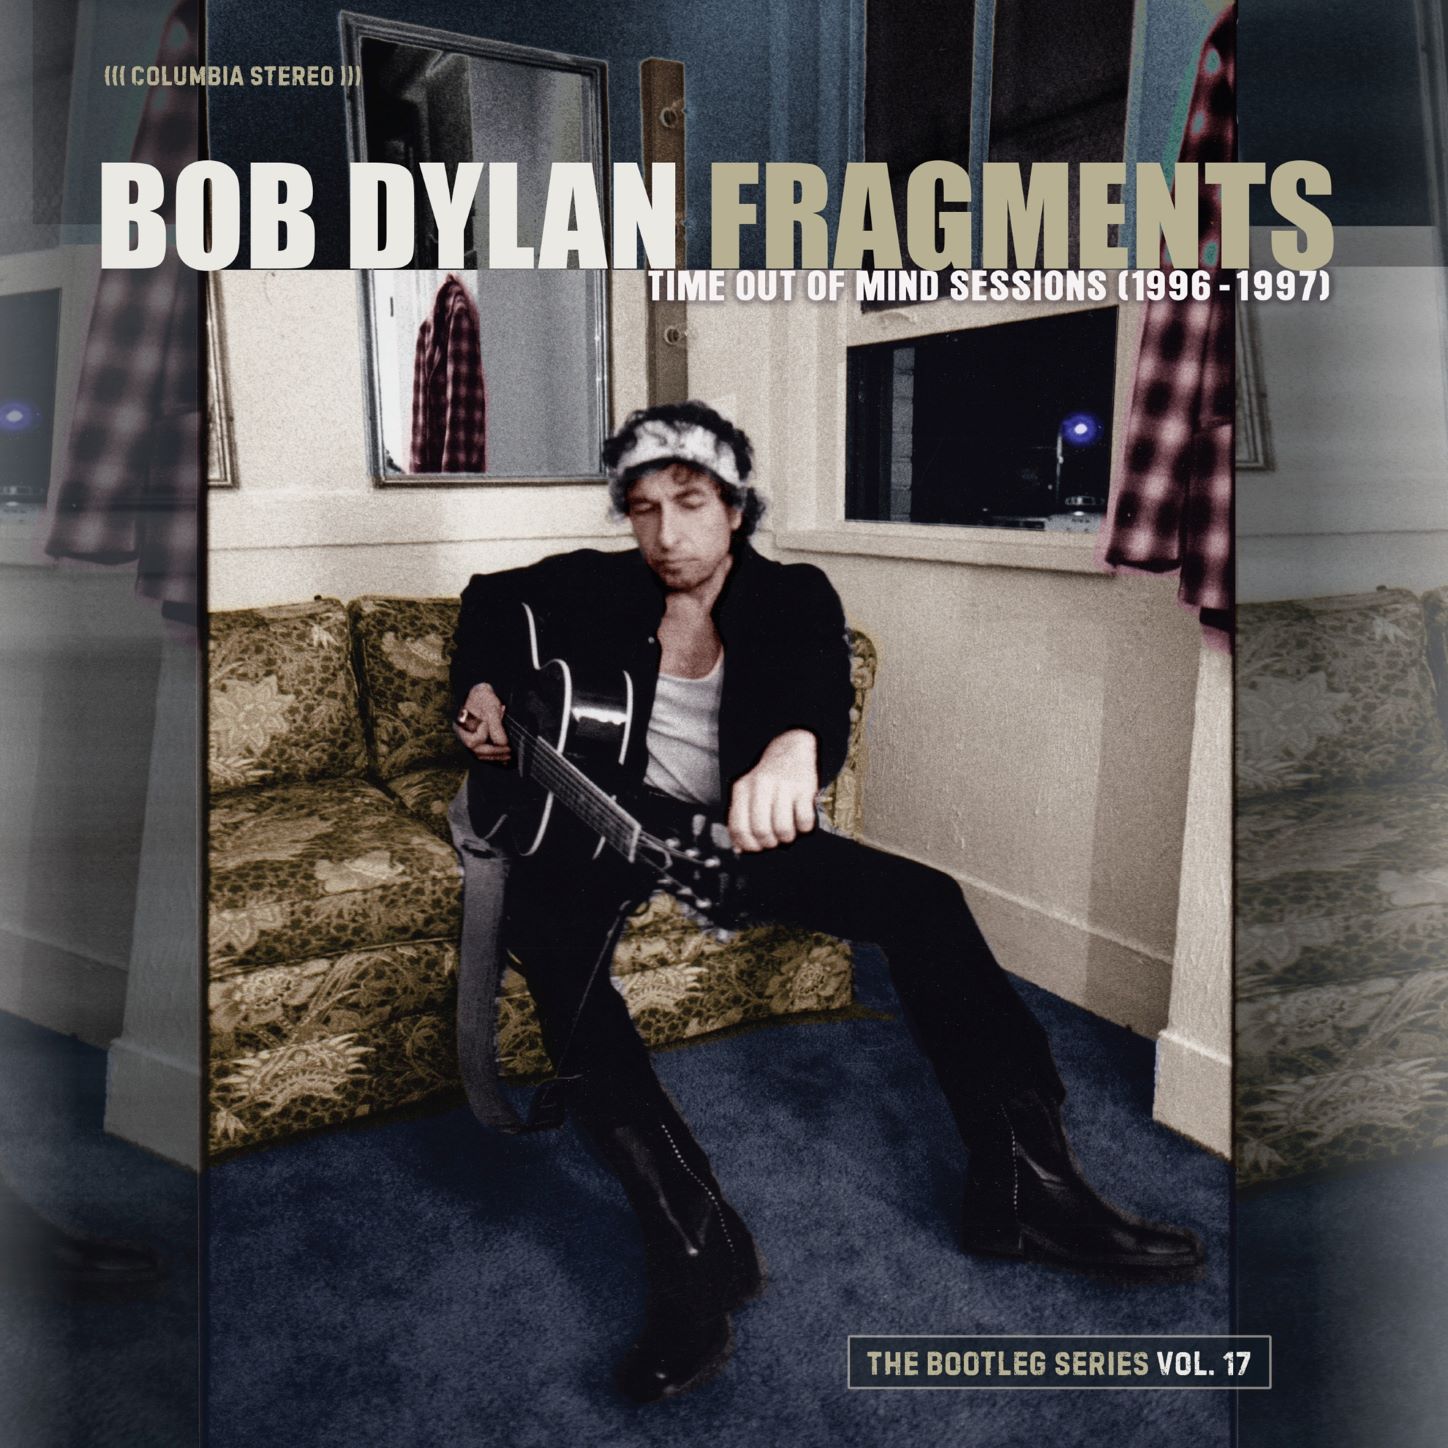 BOB DYLAN / ボブ・ディラン / FRAGMENTS - TIME OUT OF MIND SESSIONS (1996-1997): THE BOOTLEG SERIES VOL. 17 (2CD)